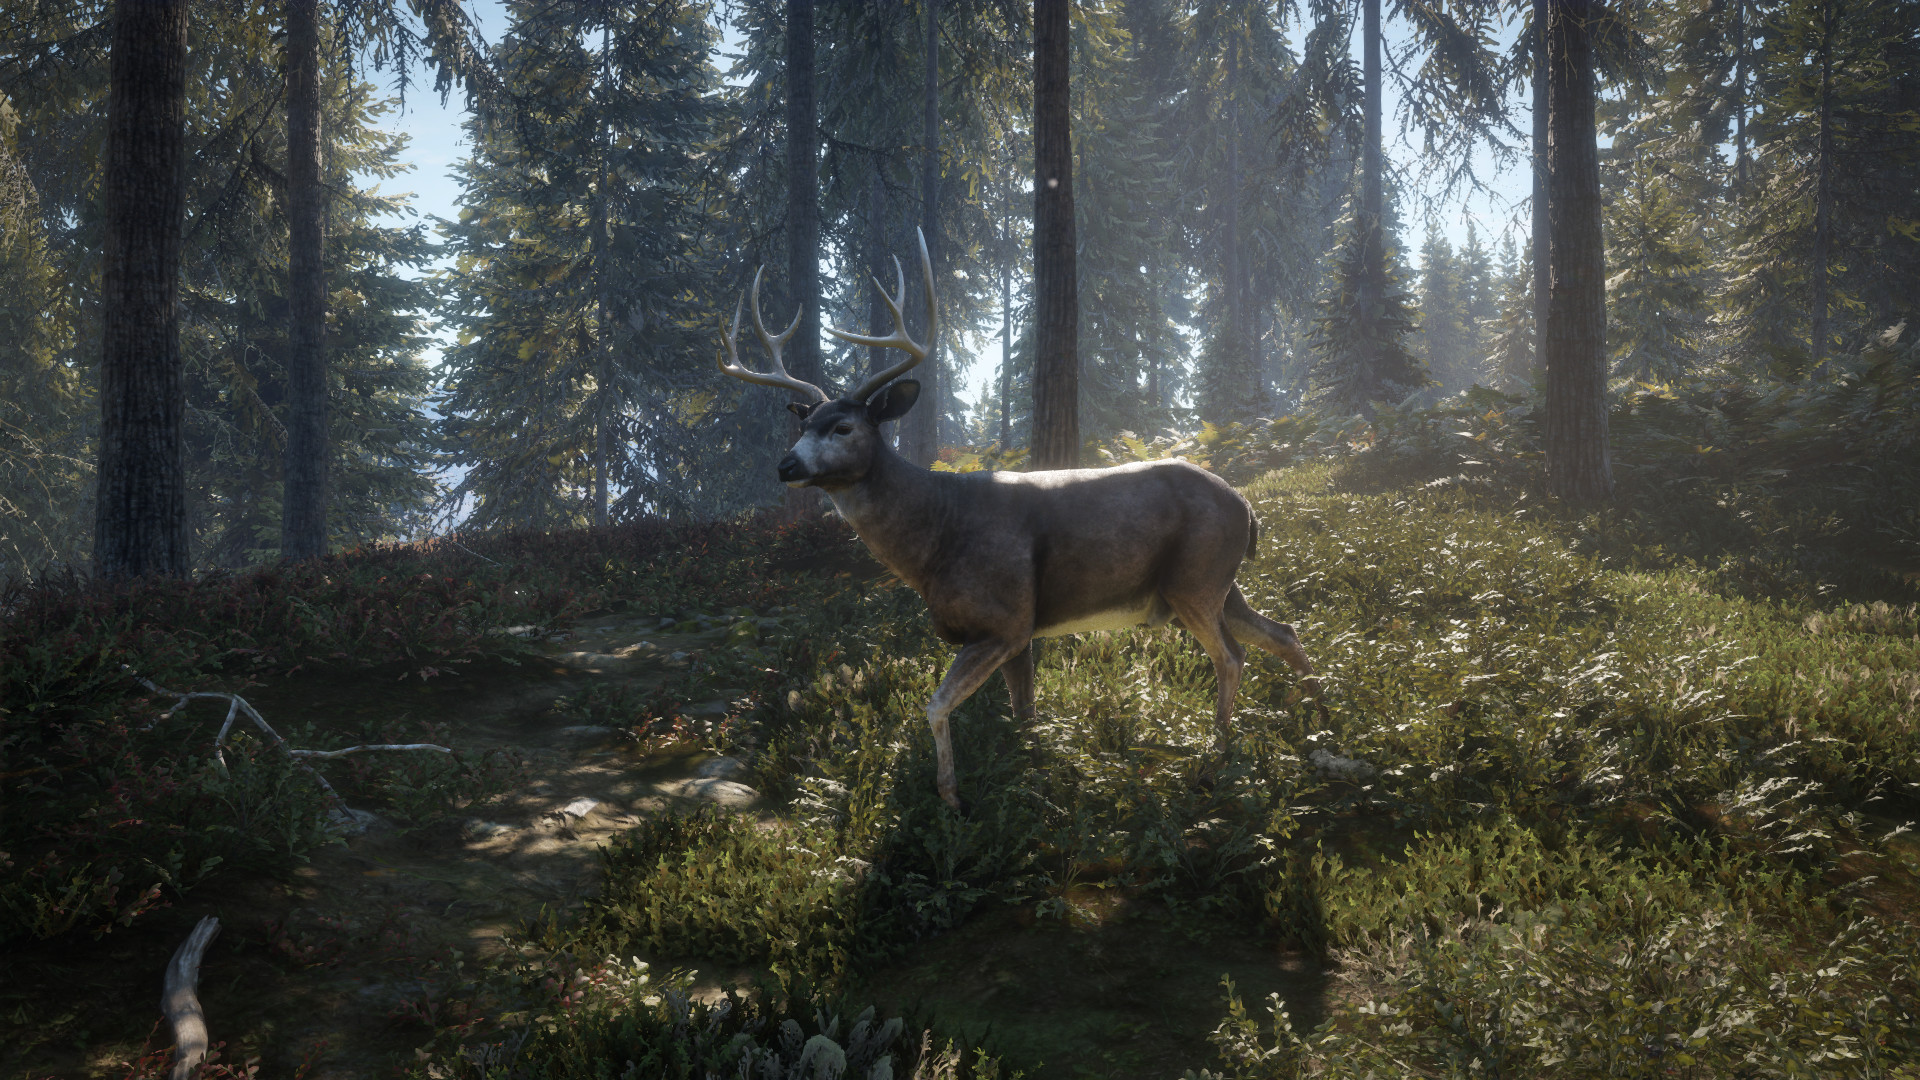 thehunter call of the wild pc requirements